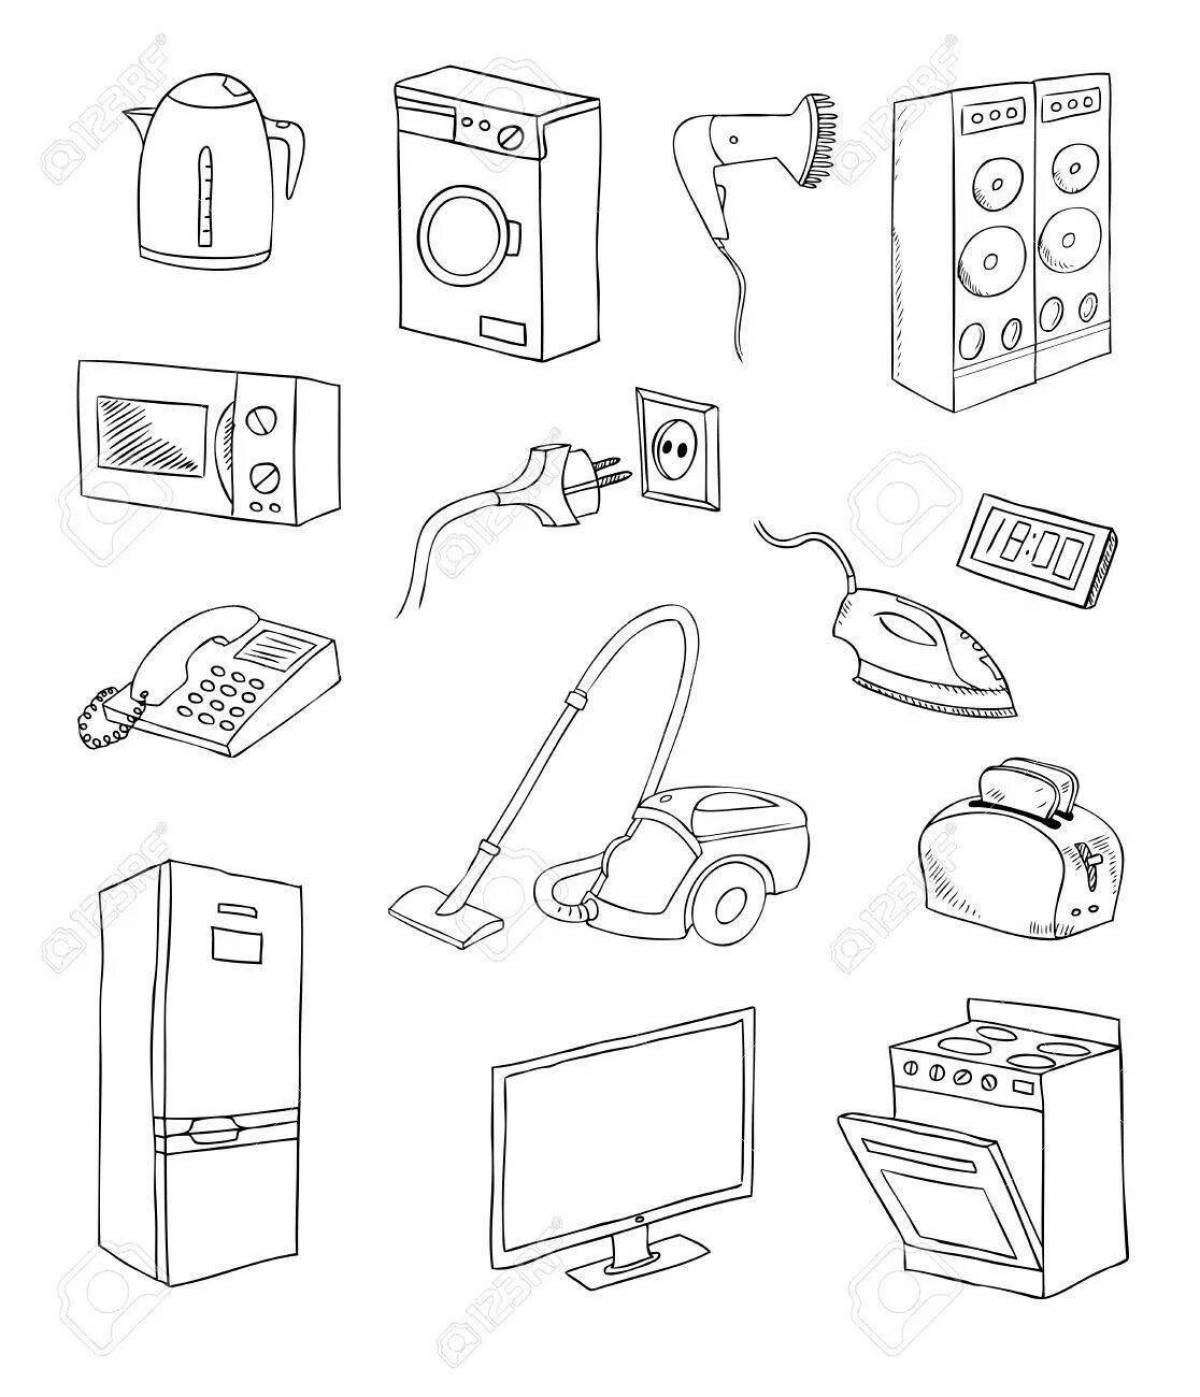 Attractive electronics coloring book